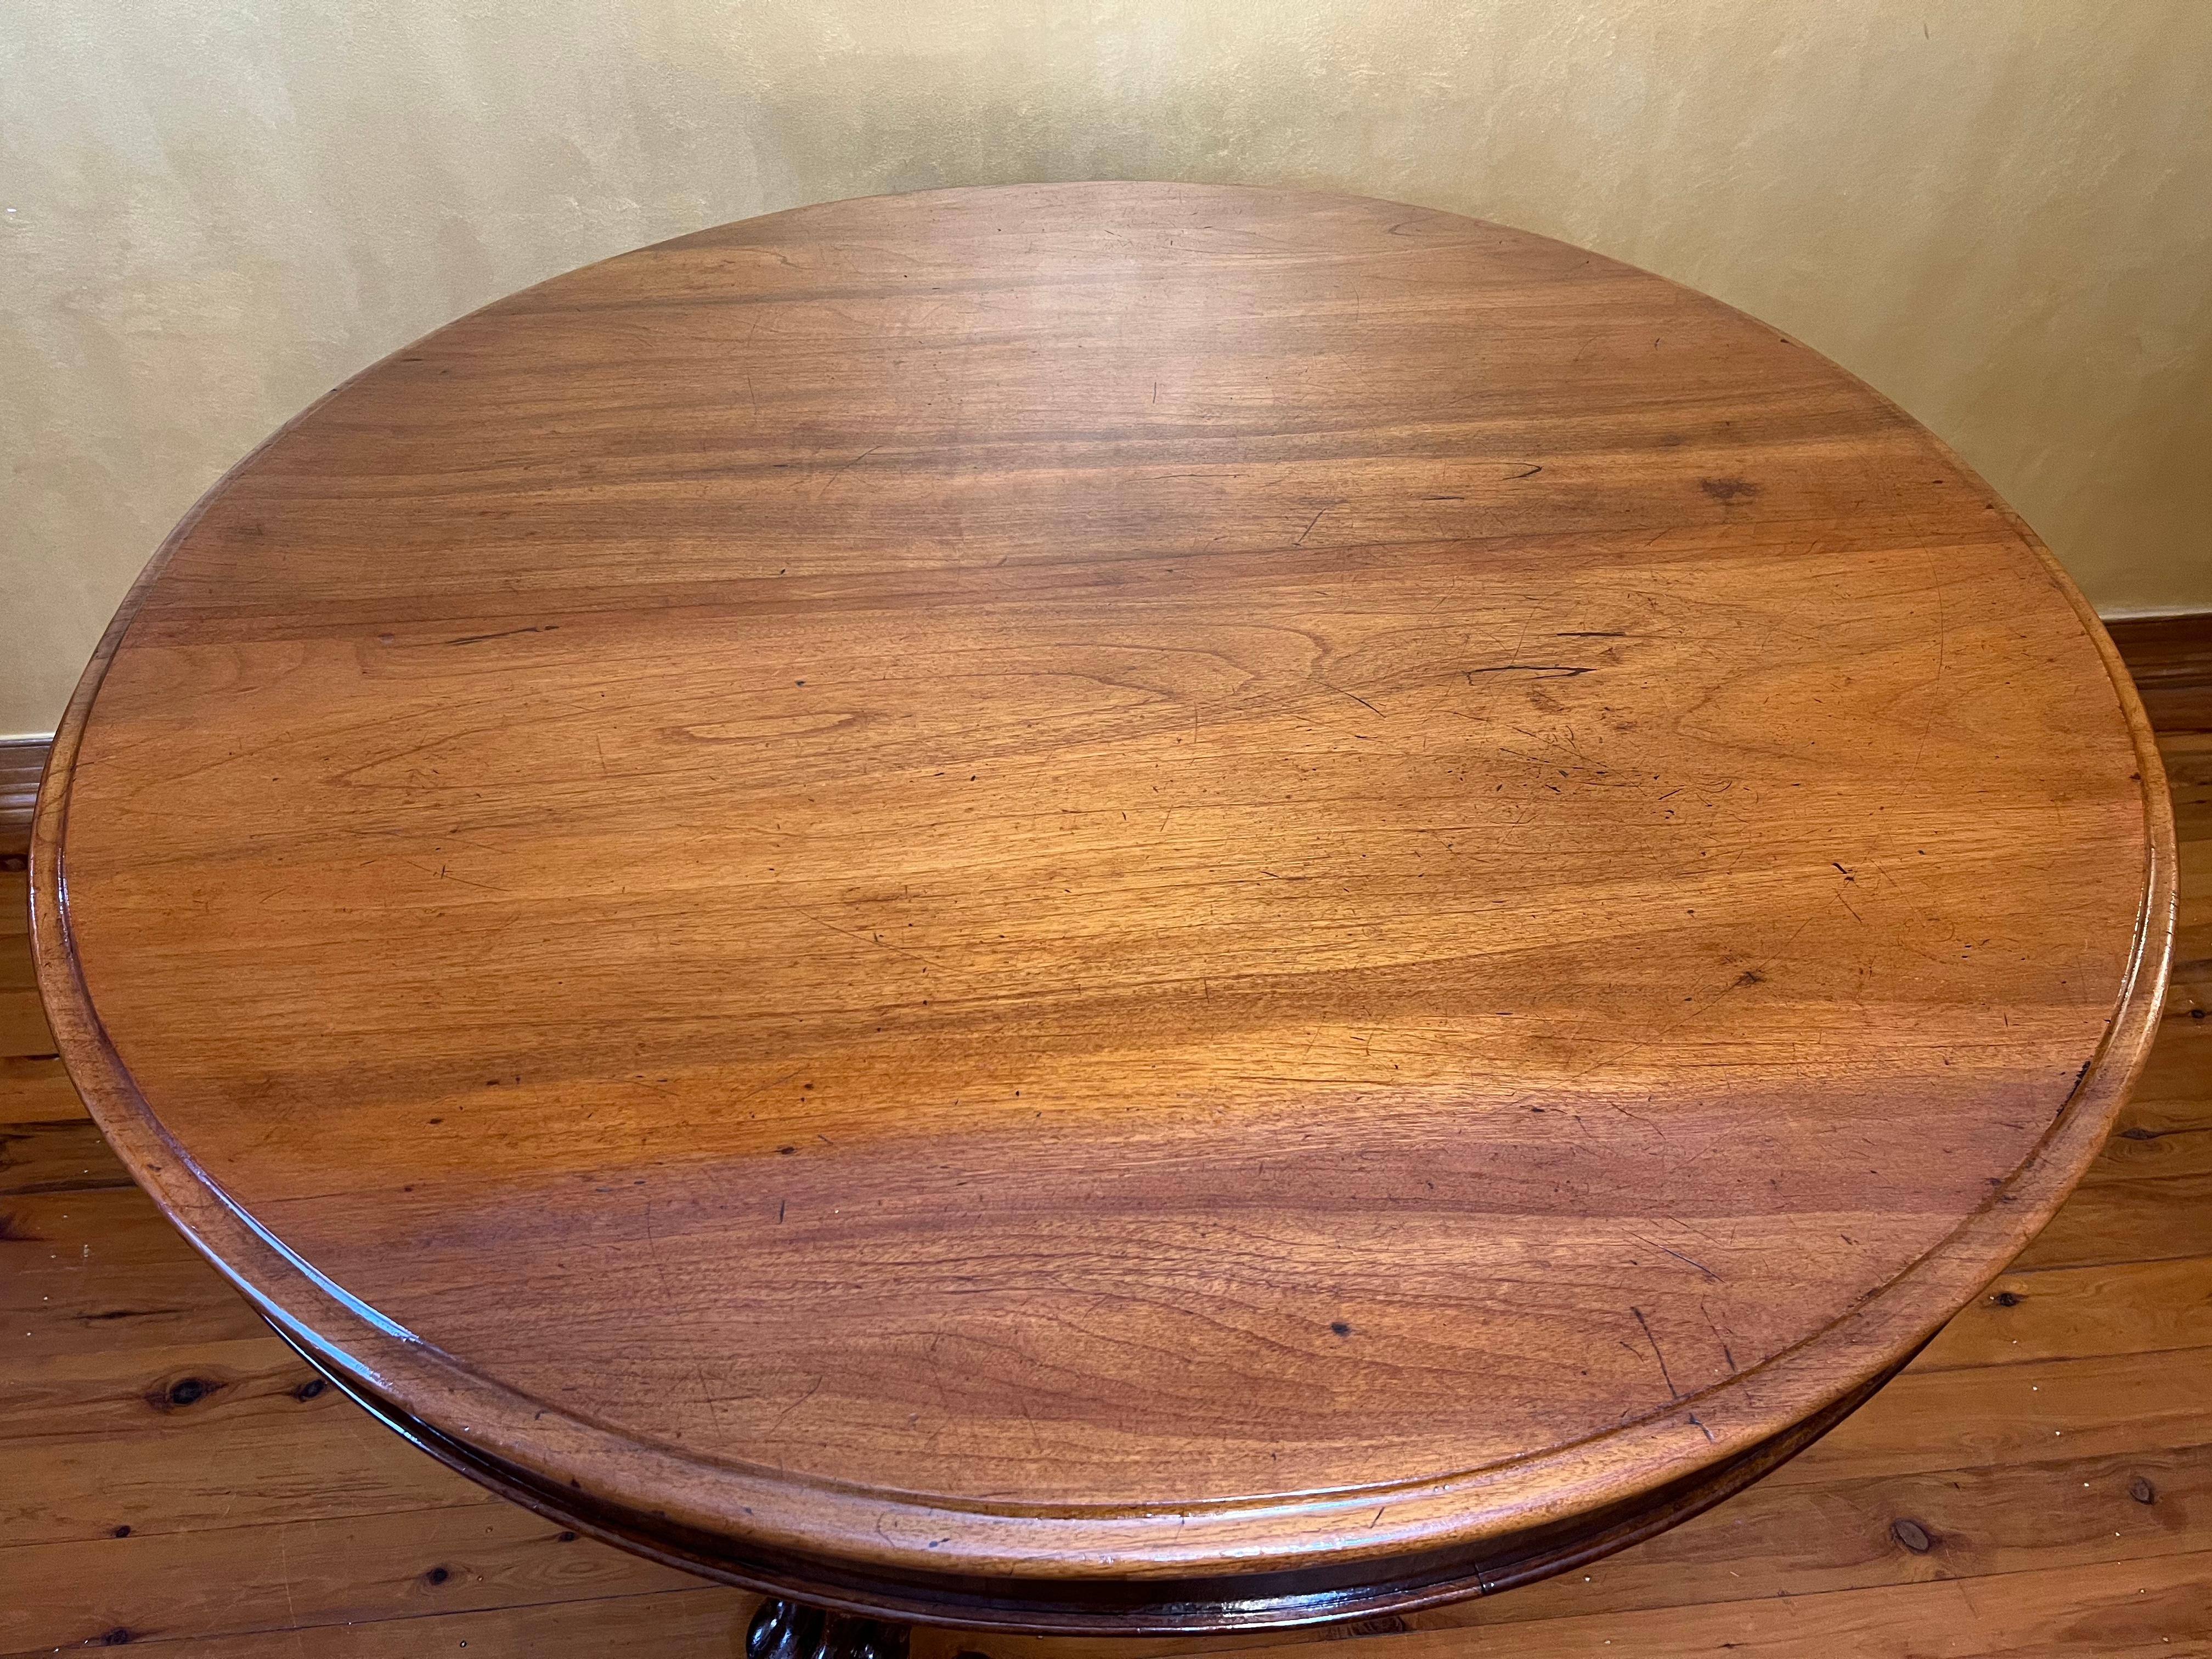 Tilt top design, top can come completely off for easy transport and moving, lion claw feet and grape carving on each legs, porcelain castors on each leg, there is scratch marks to the top due to age can be sanded and re polished if desired a more